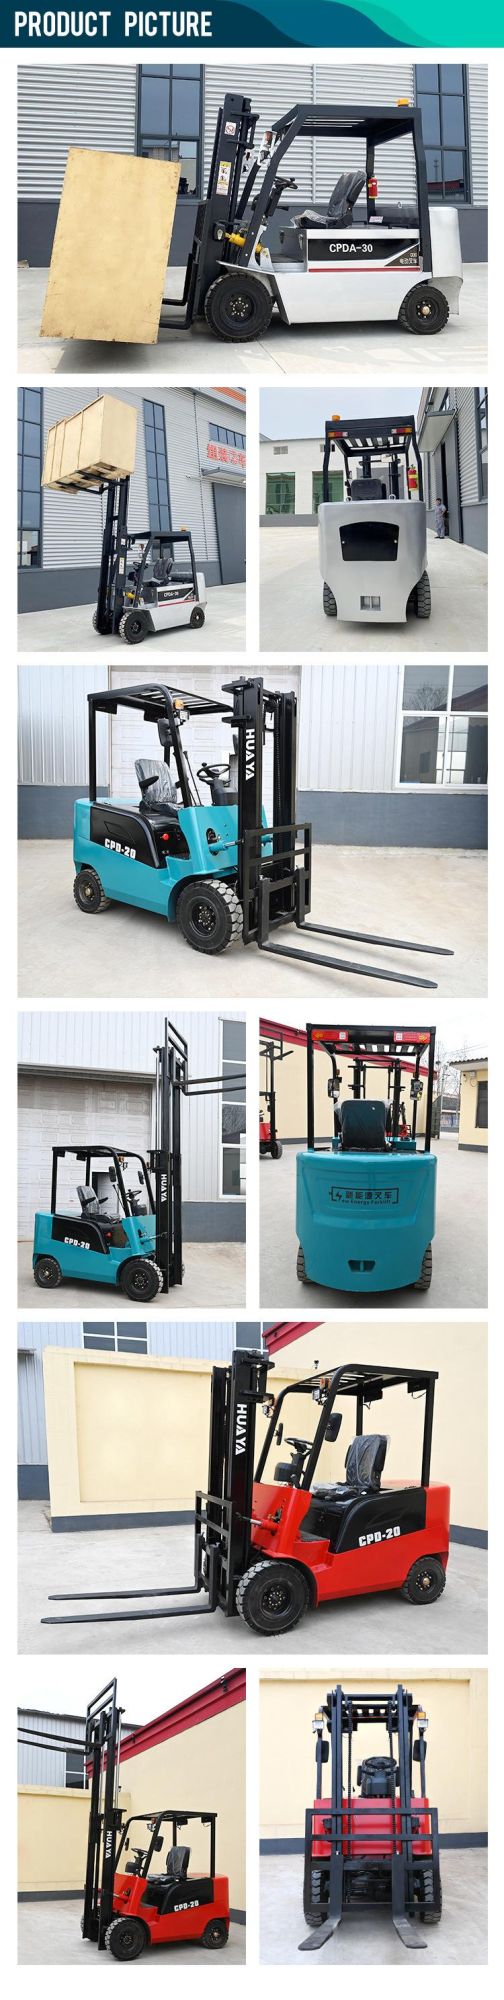 Huaya New China Attachment 3 Ton 2500kg Electric Forklift Price with Good Service